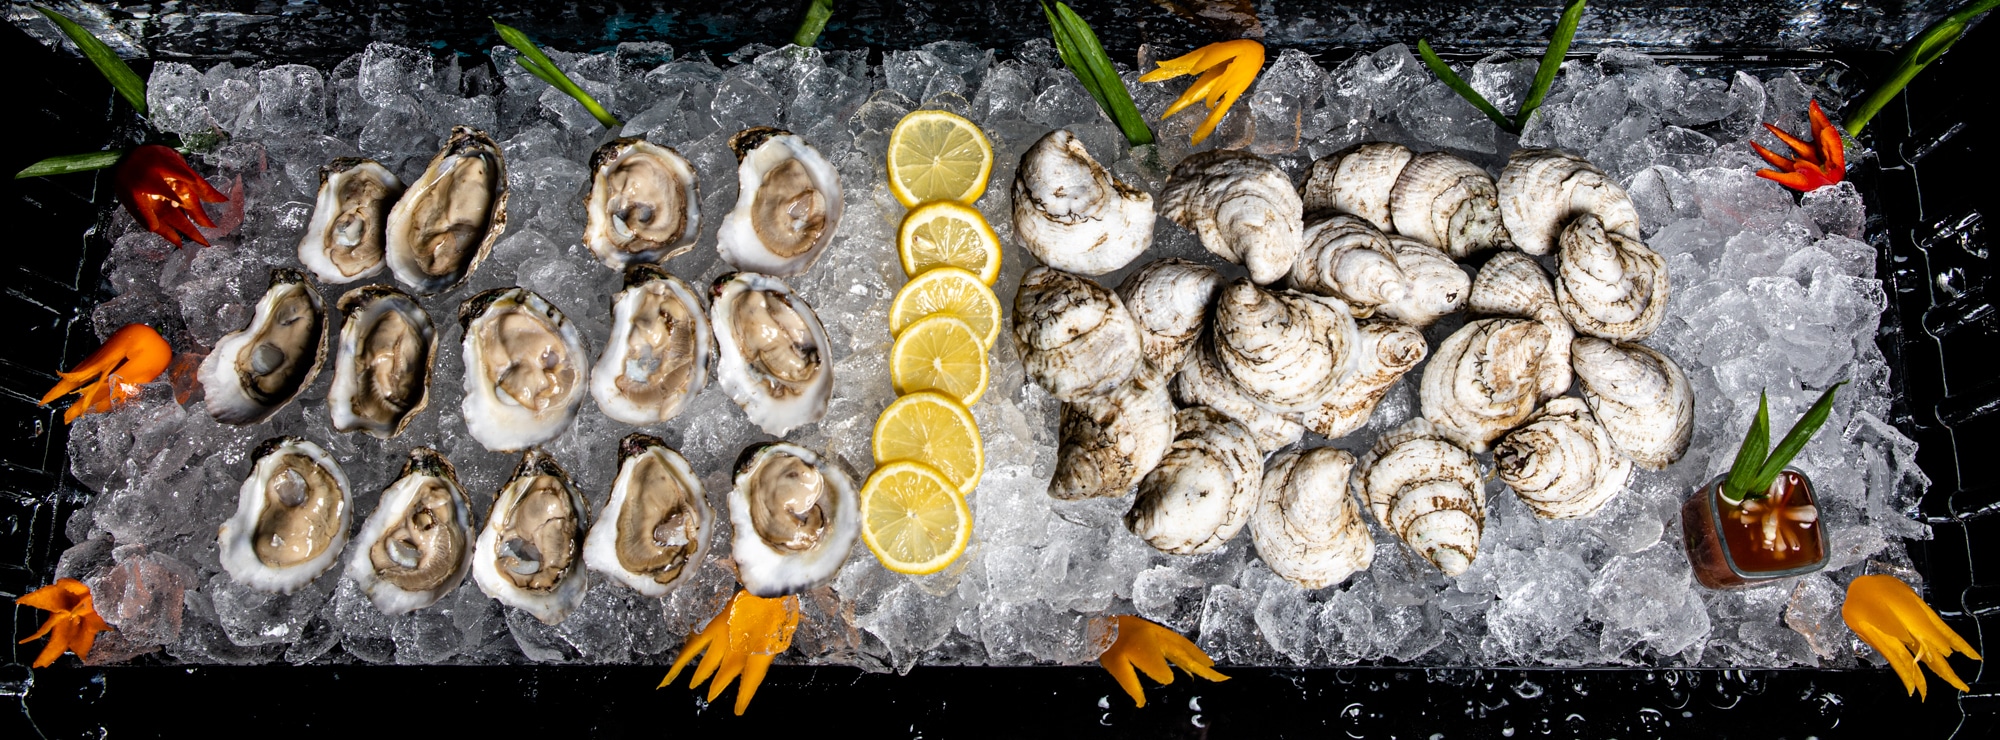 Chesapeake Gold and Mermaid Kiss Oysters on ice